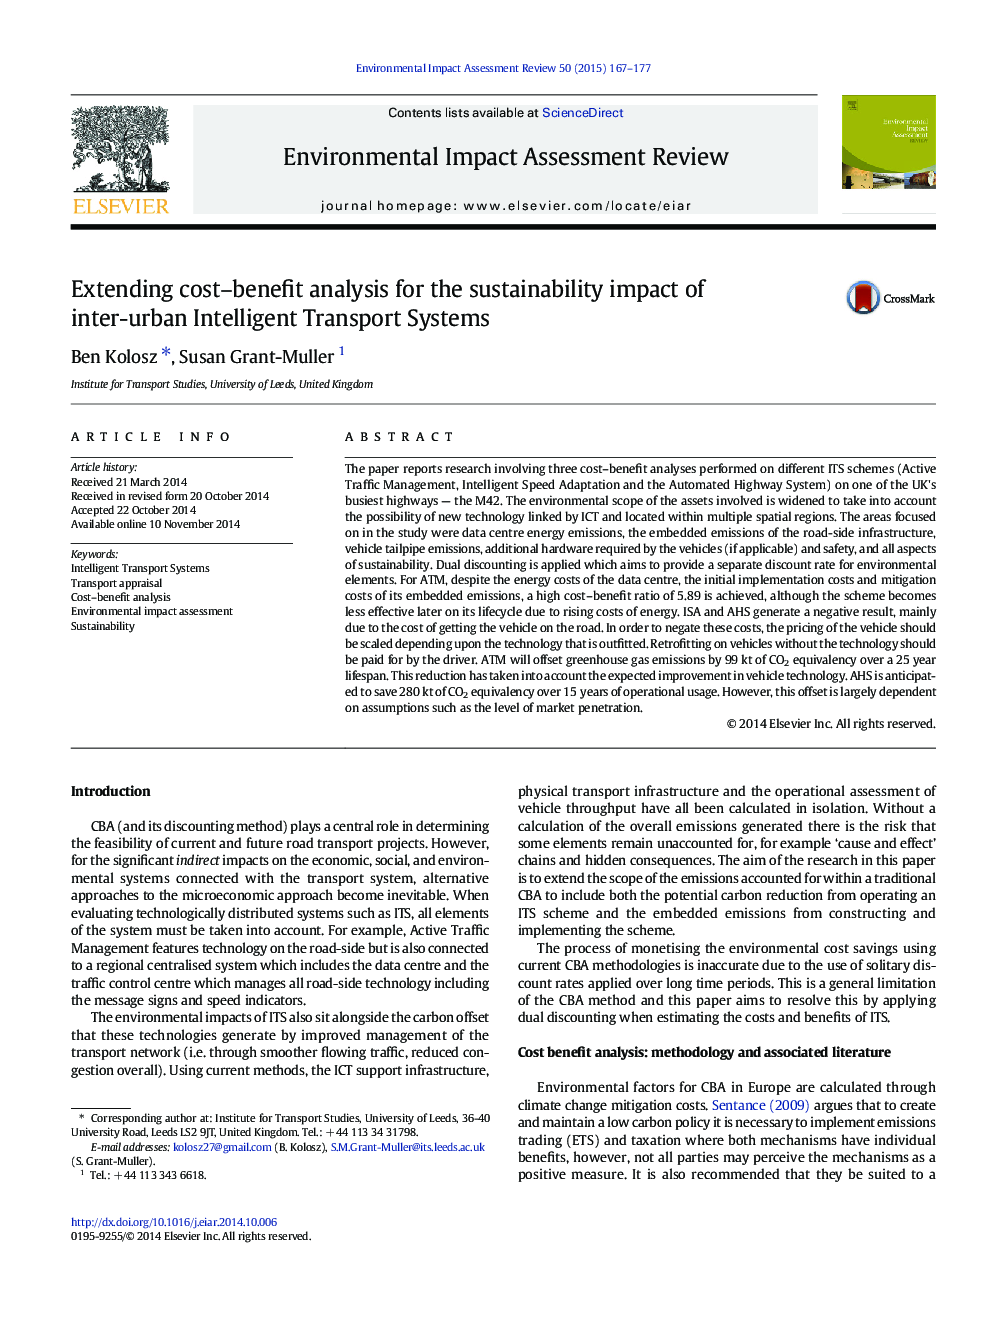 Extending cost-benefit analysis for the sustainability impact of inter-urban Intelligent Transport Systems